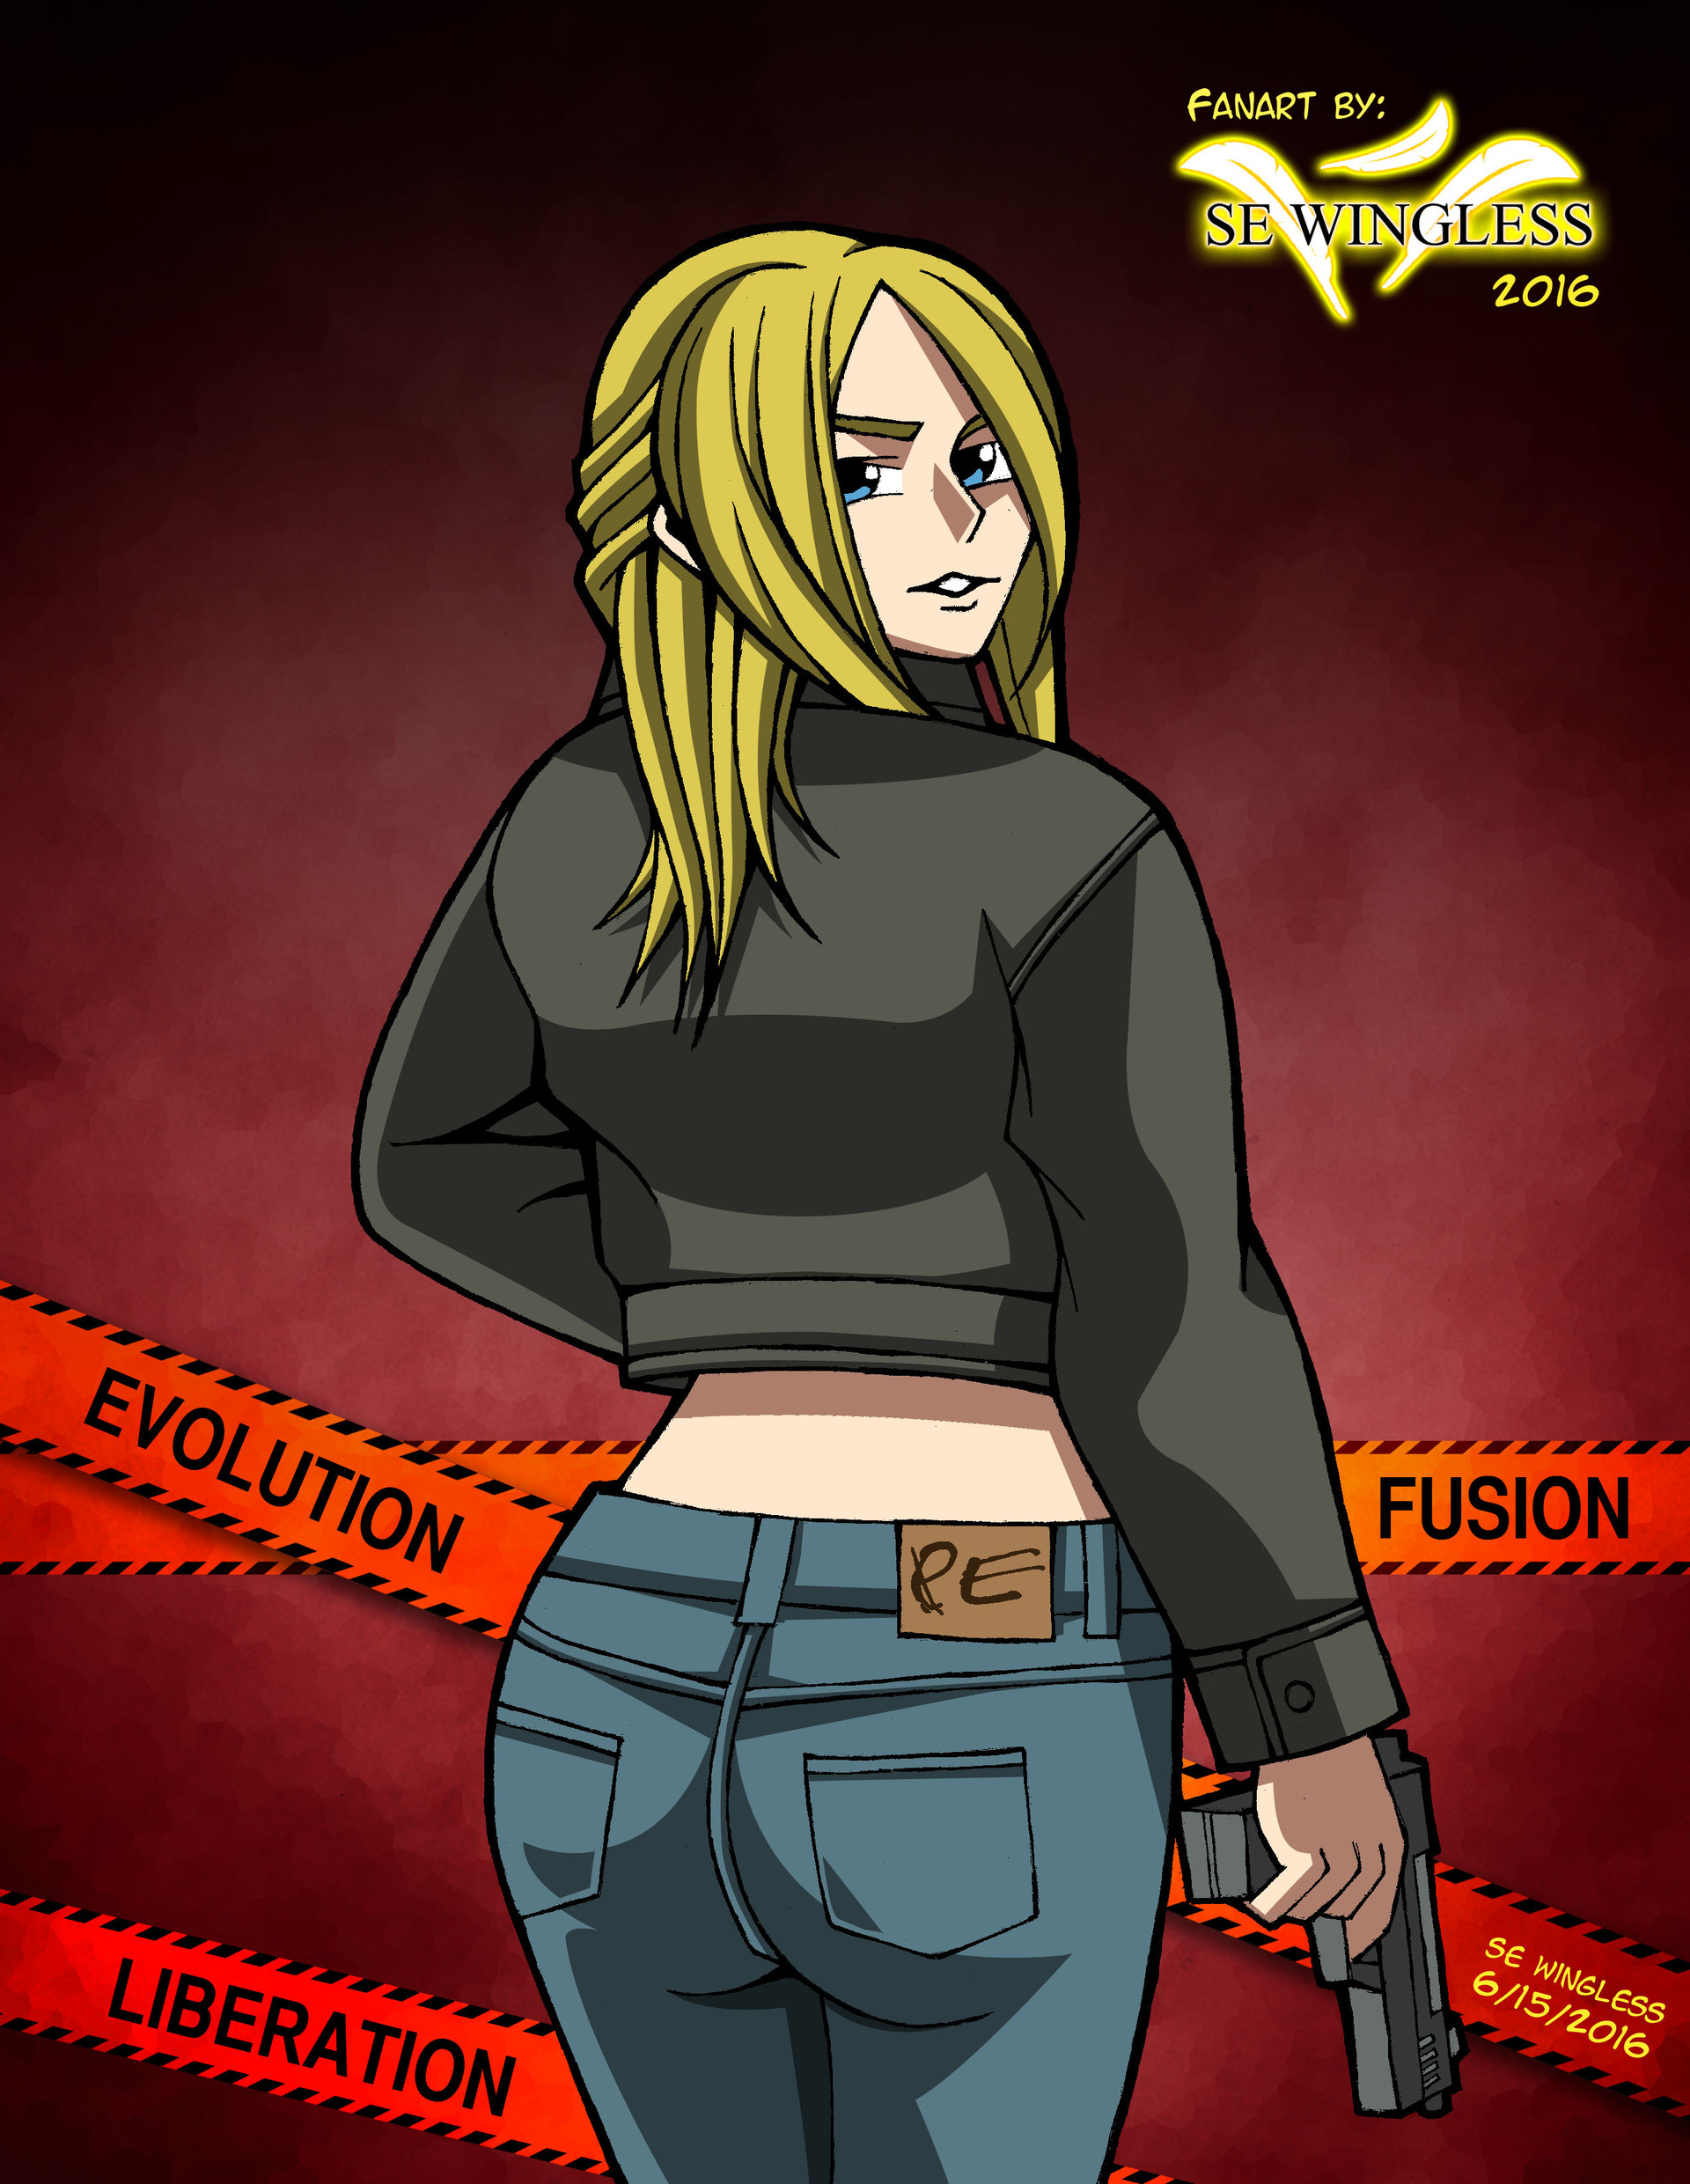 aya brea (parasite eve) drawn by miche